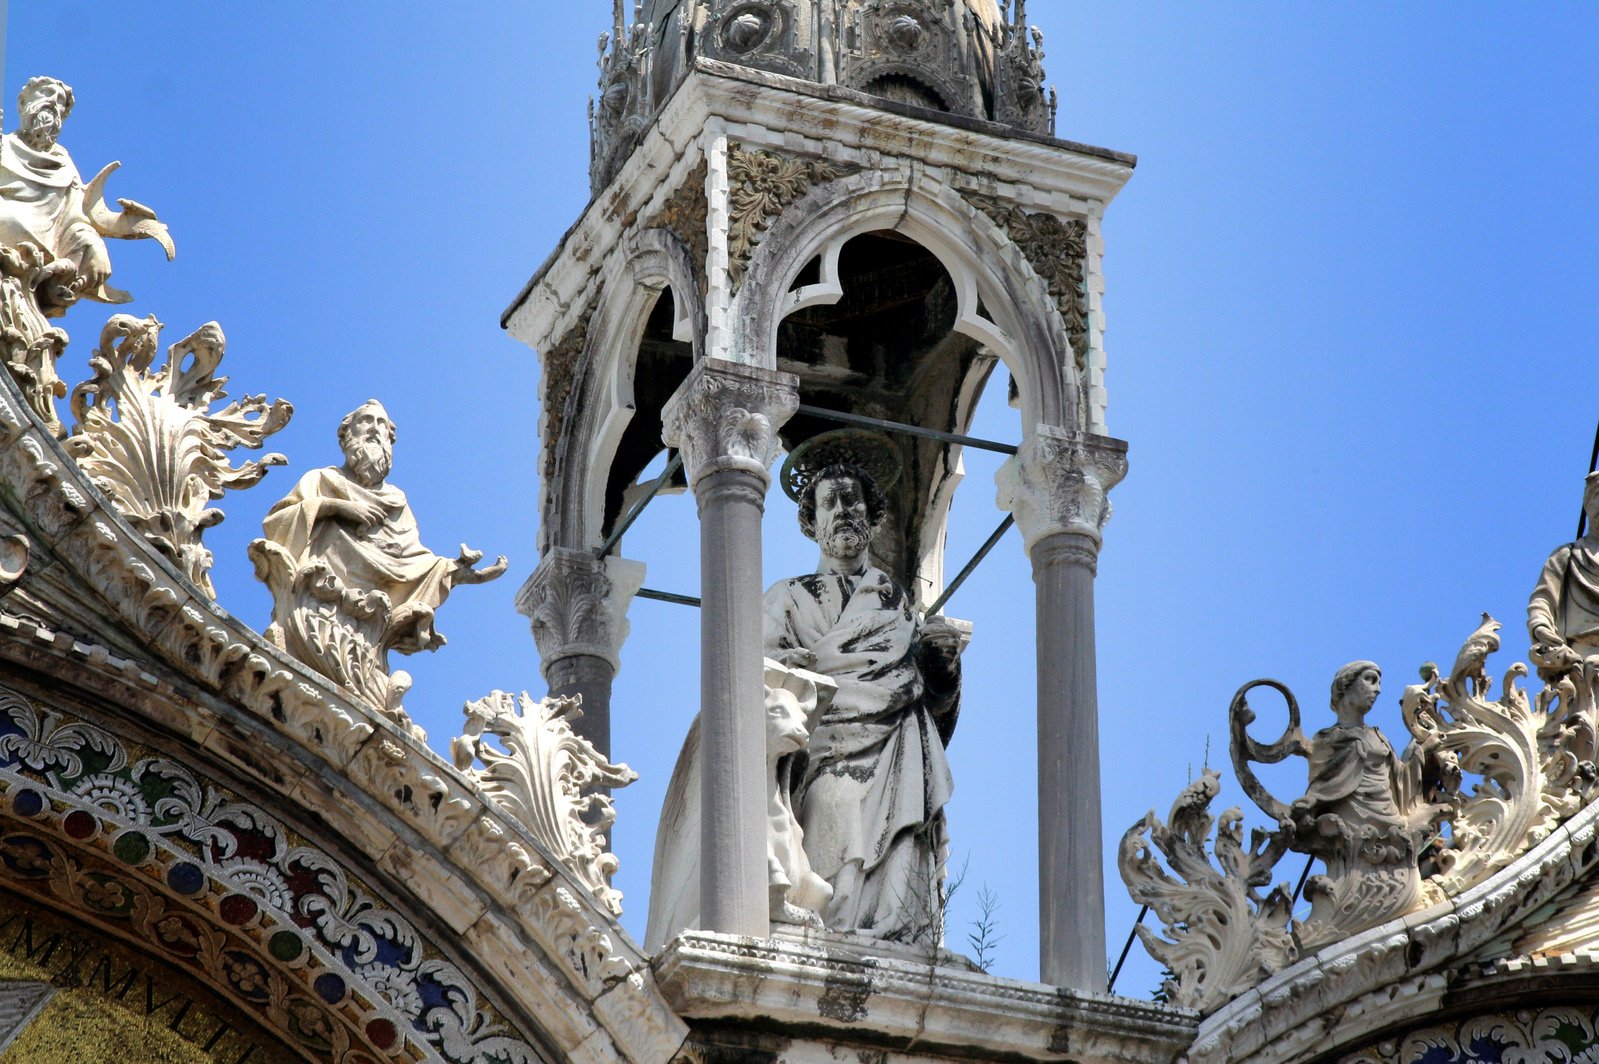 an ornate clock tower that features many statues